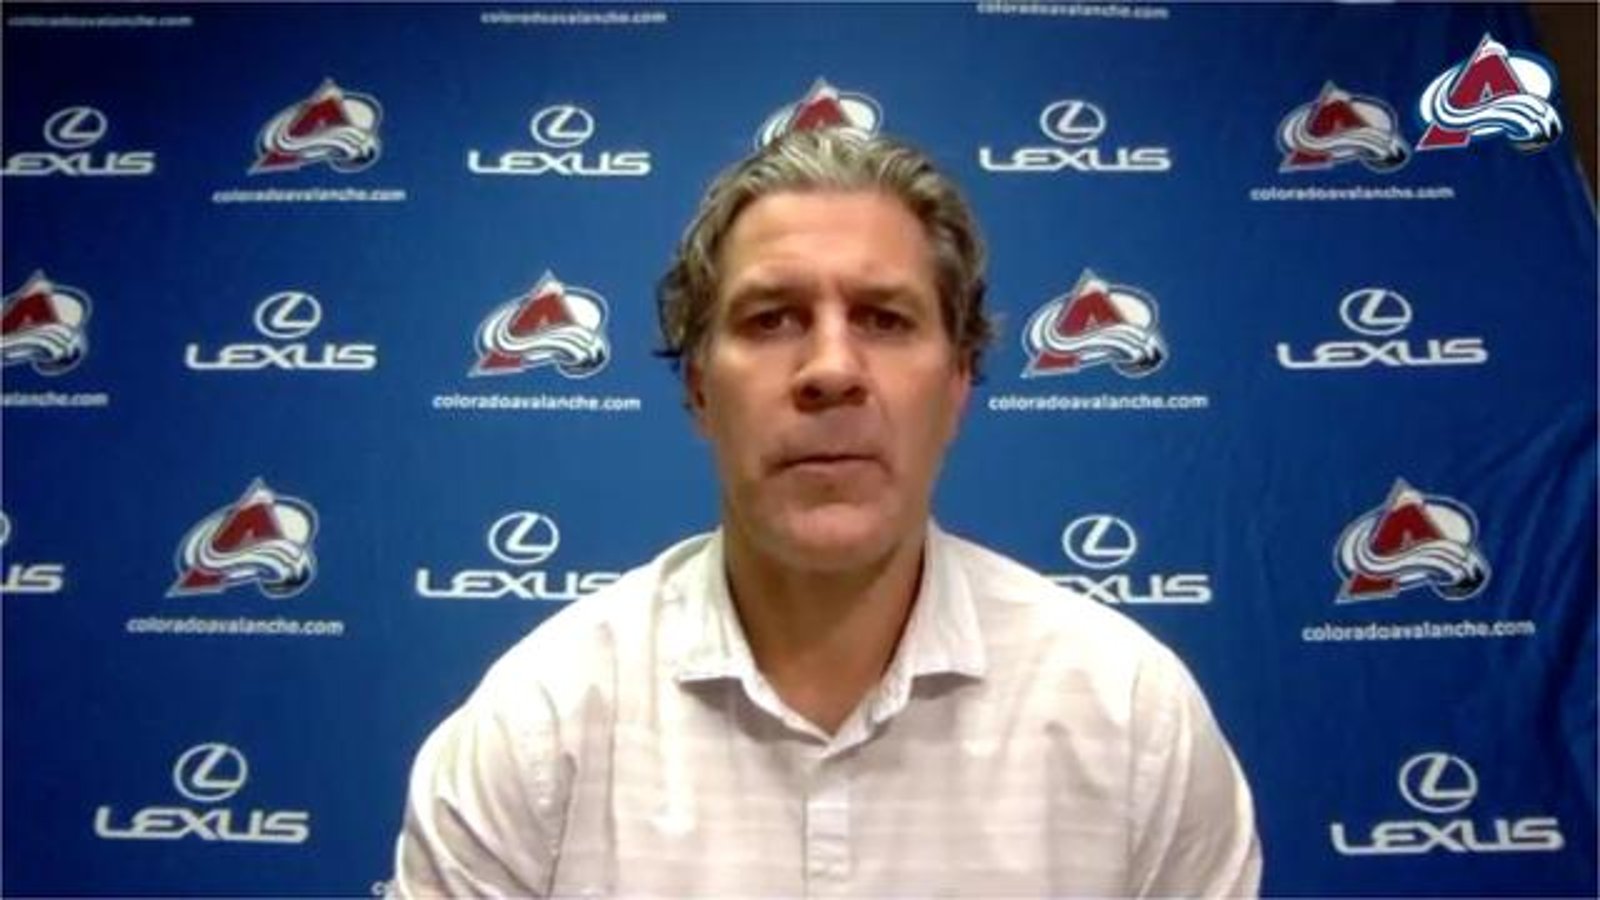 Fans struggle with rumour that coach Bednar’s job is in jeopardy if Avs lose to Vegas